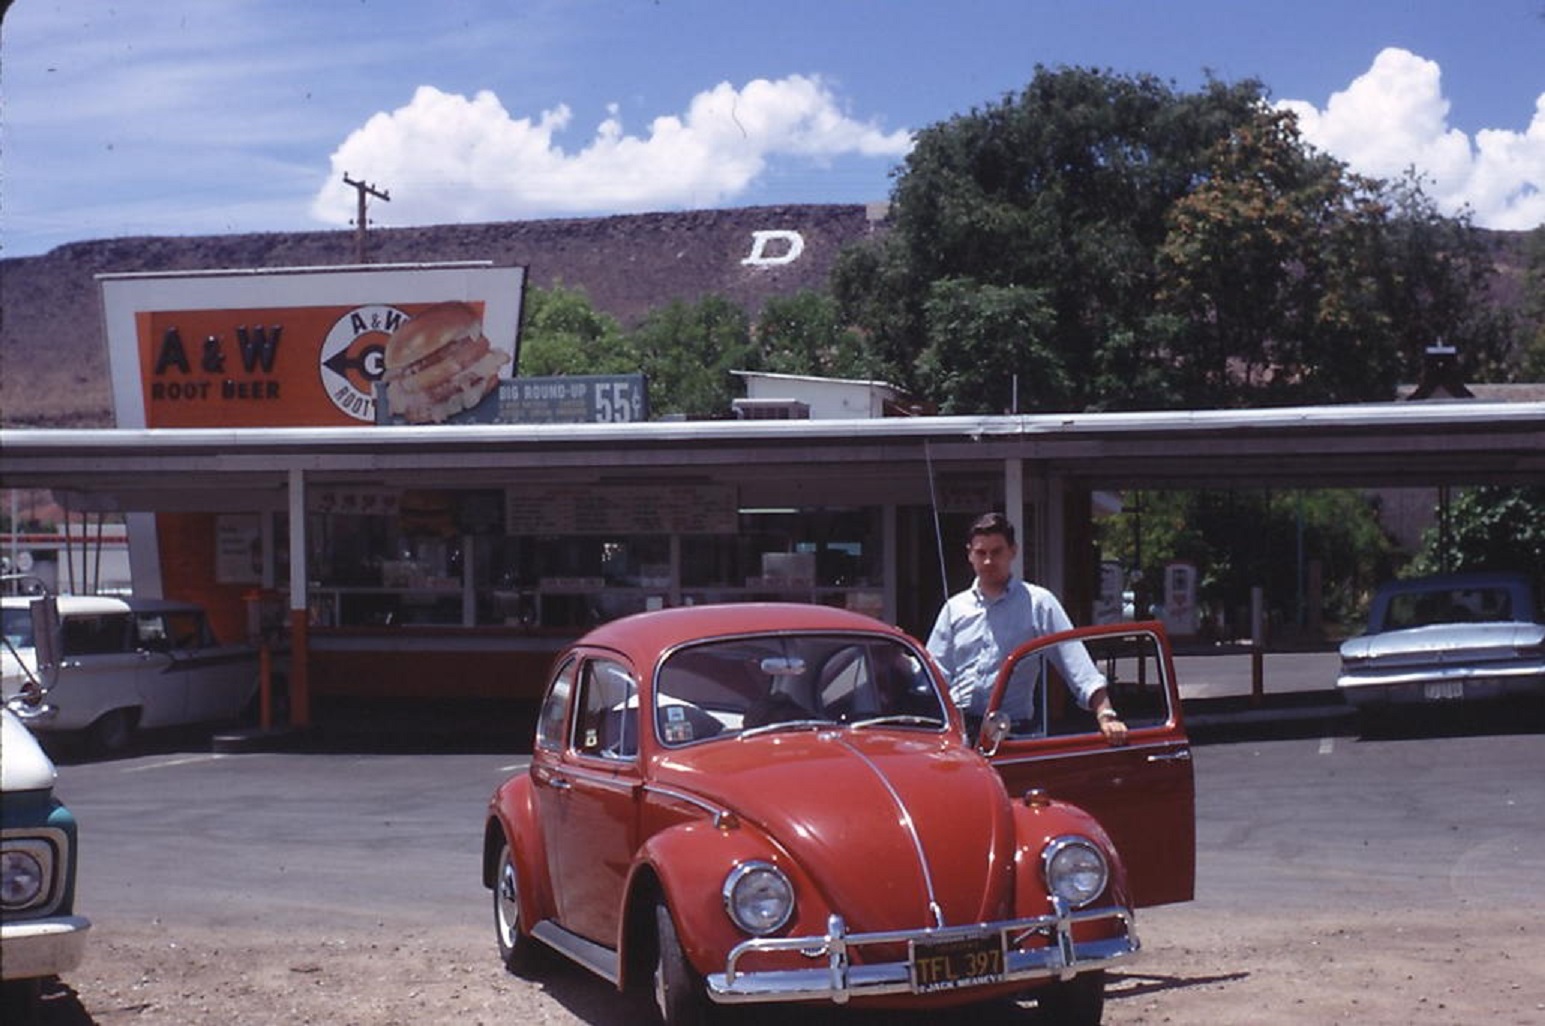 The A&W drive-in on Old Hwy 91 in St George